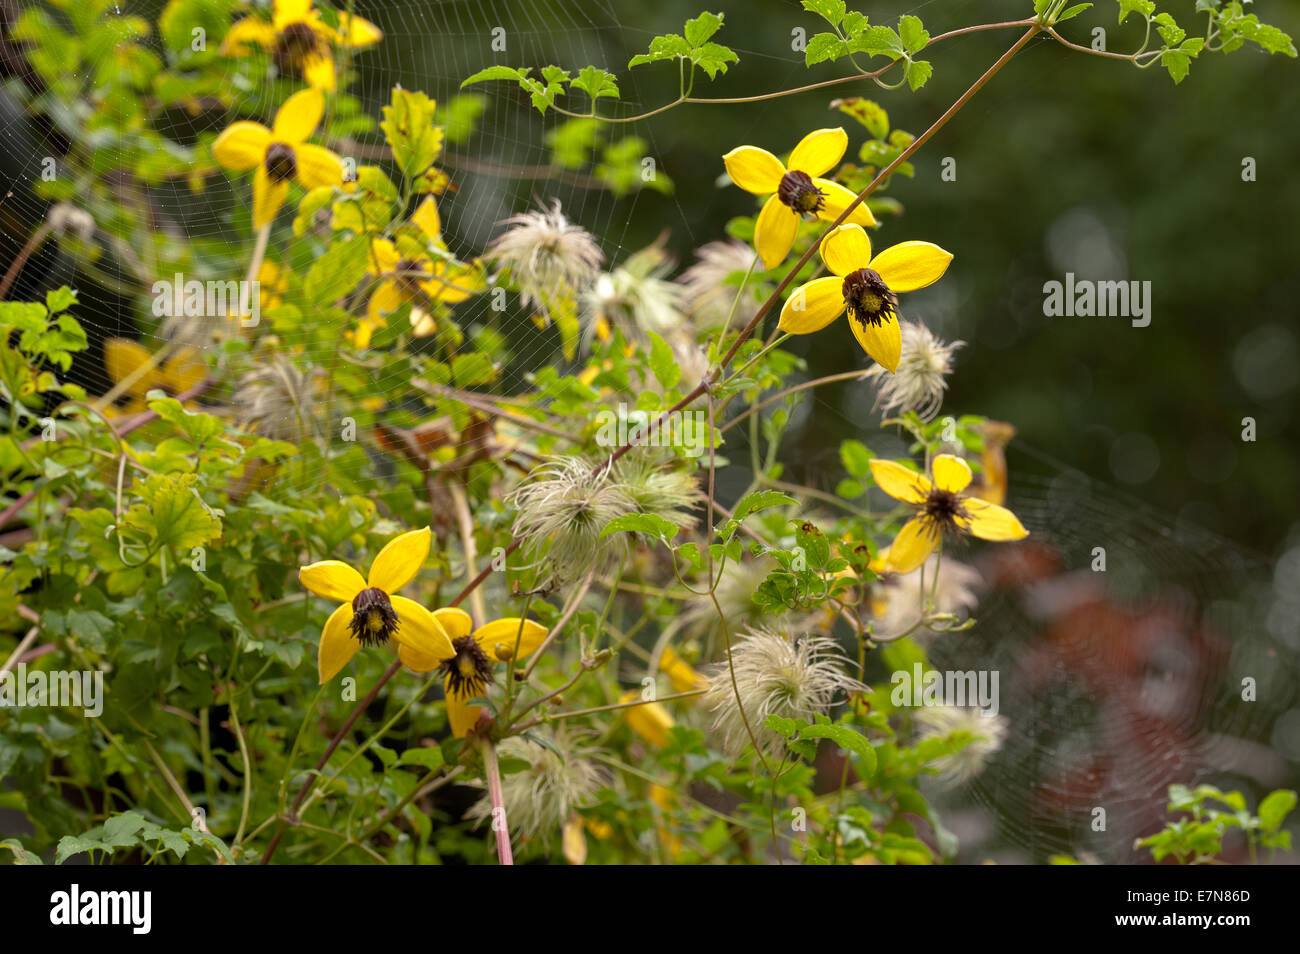 Attractive clematis climber bright golden yellow with long anthers stamen and petals against green foliage Stock Photo